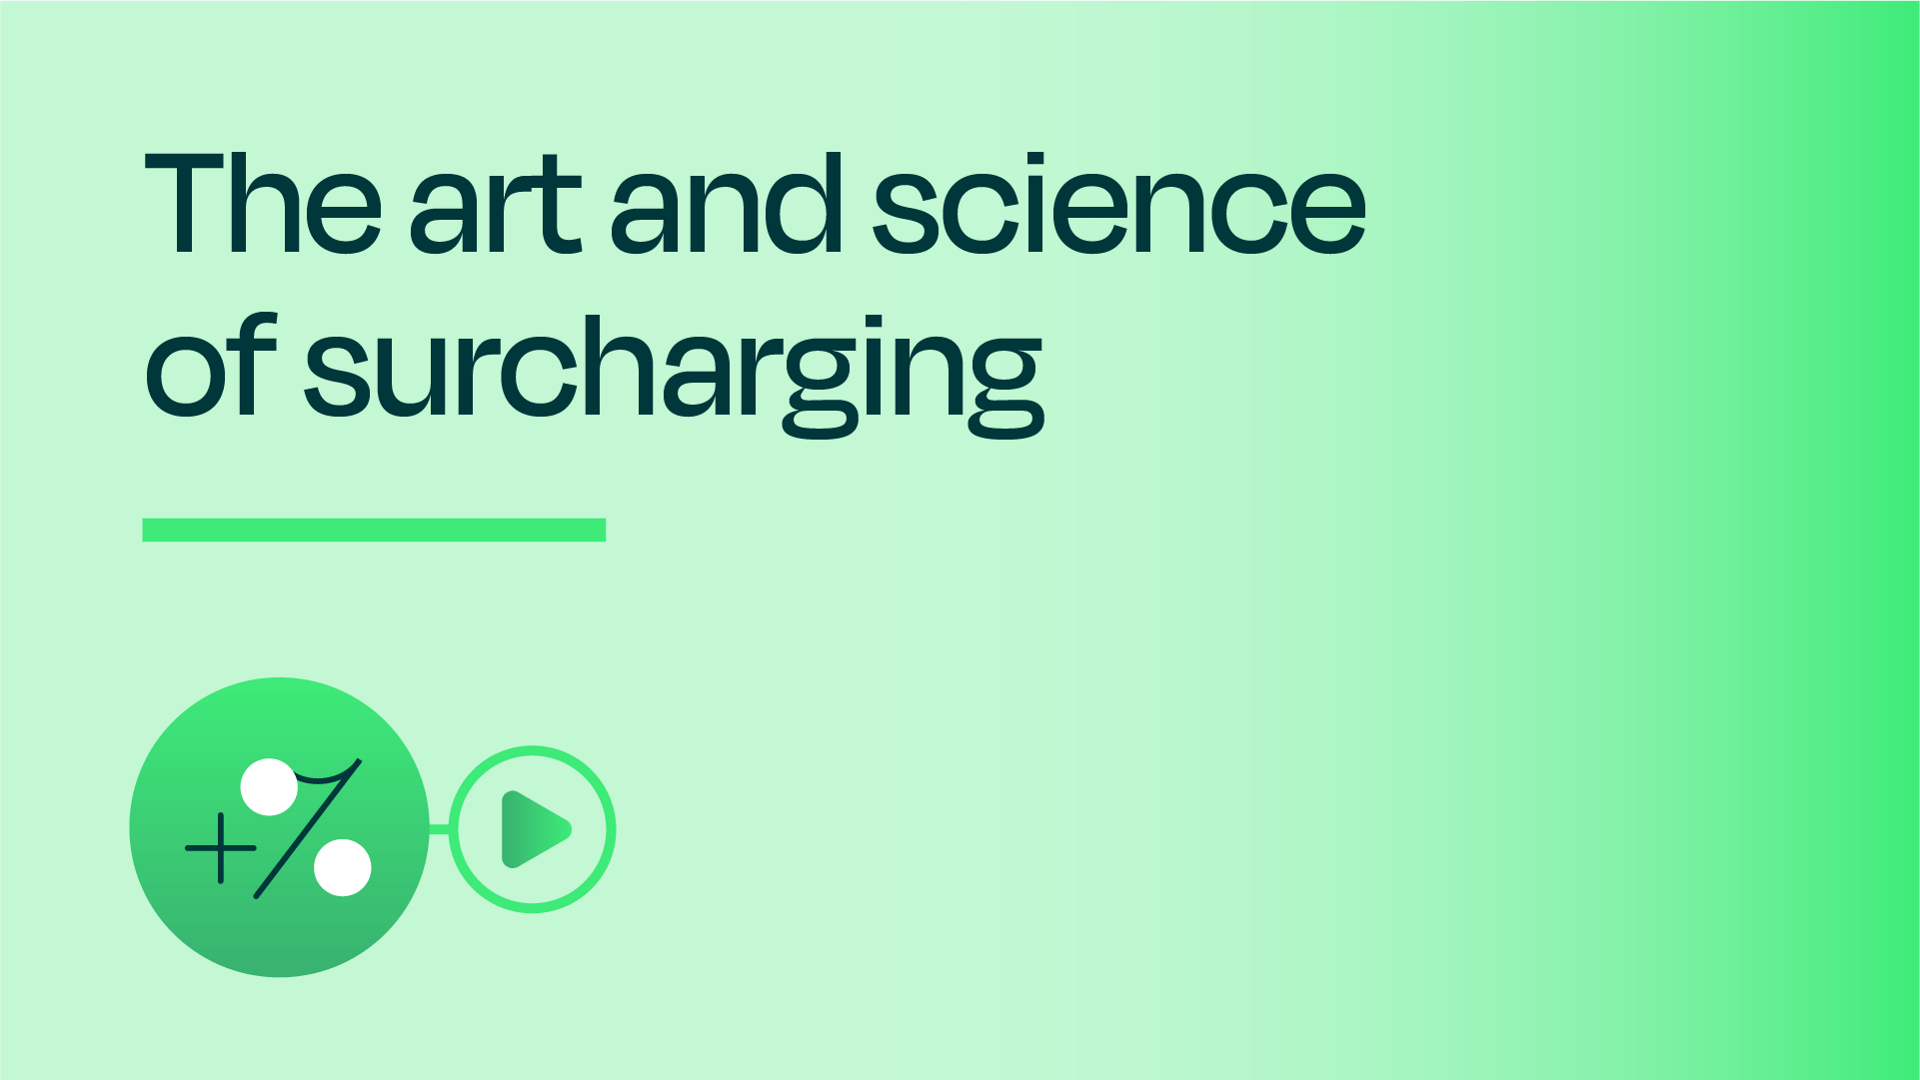 The art and science of surcharging